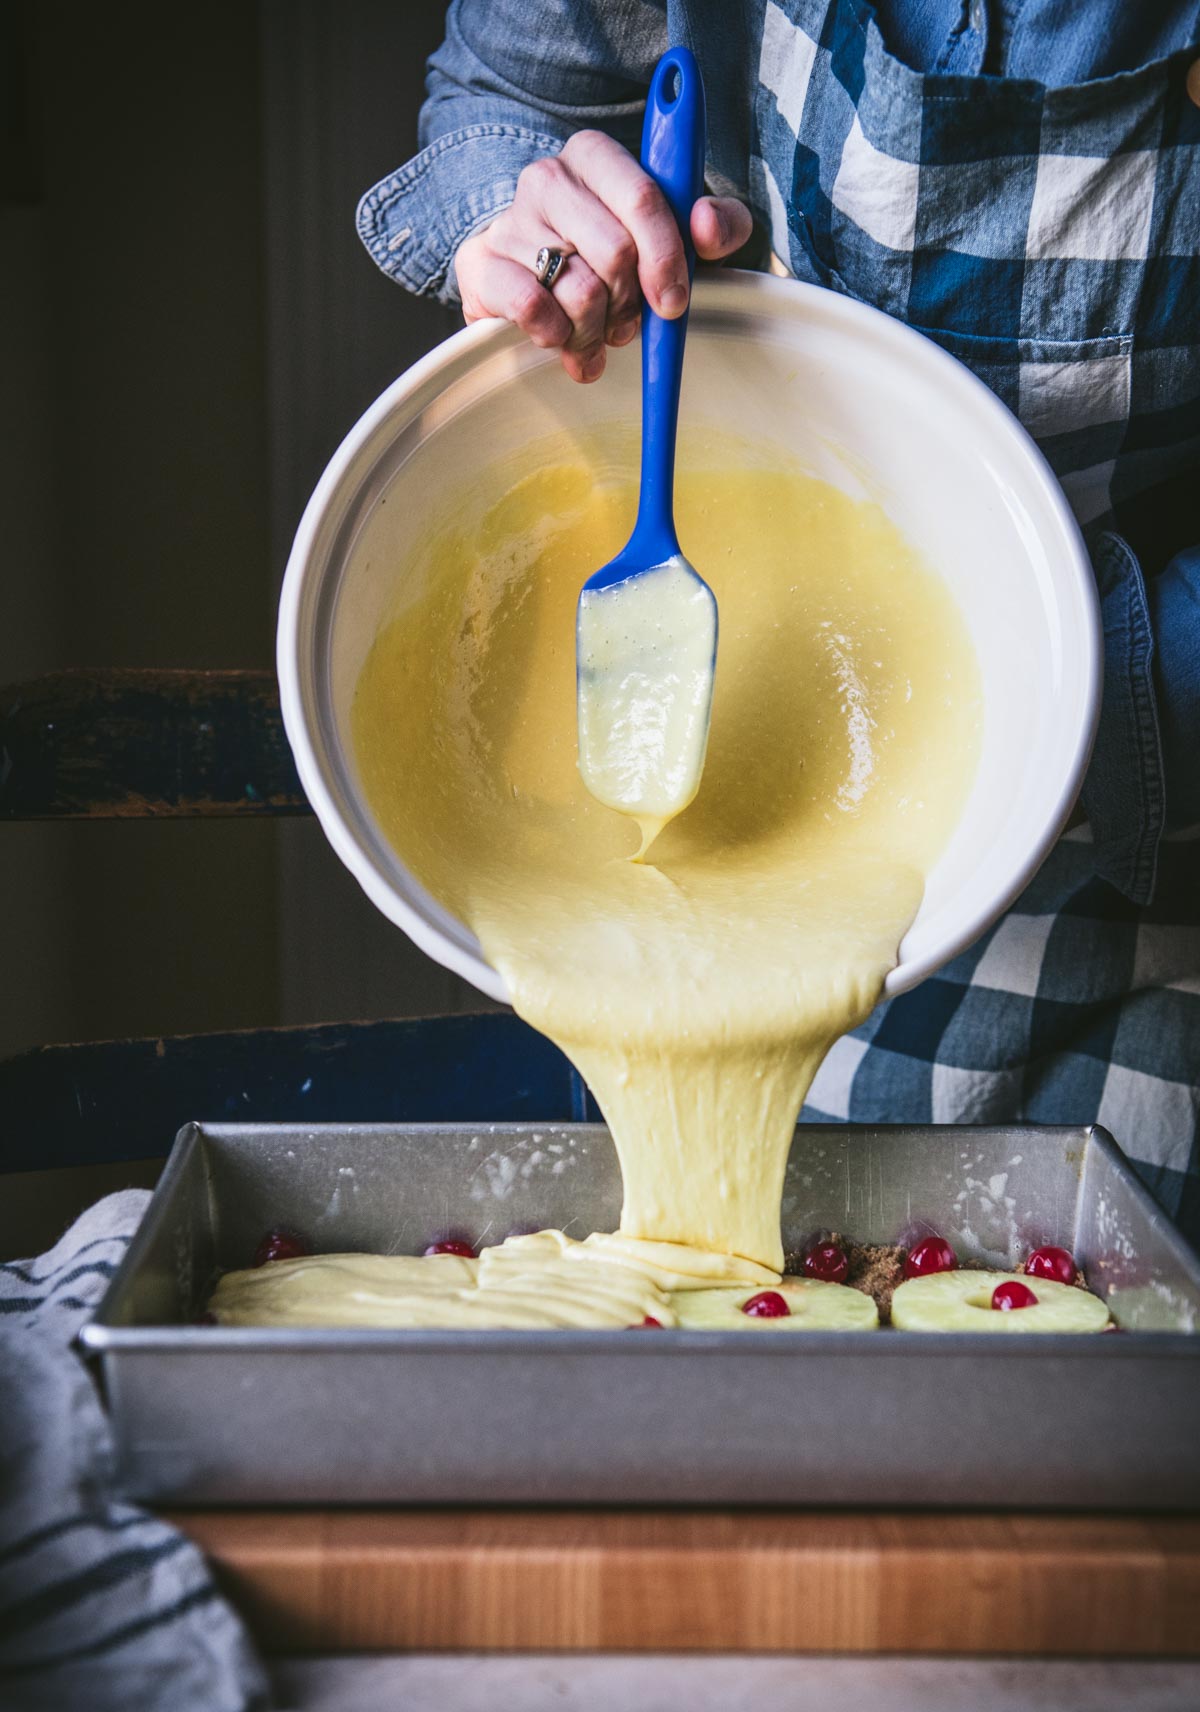 Pouring cake mix batter into a pan.